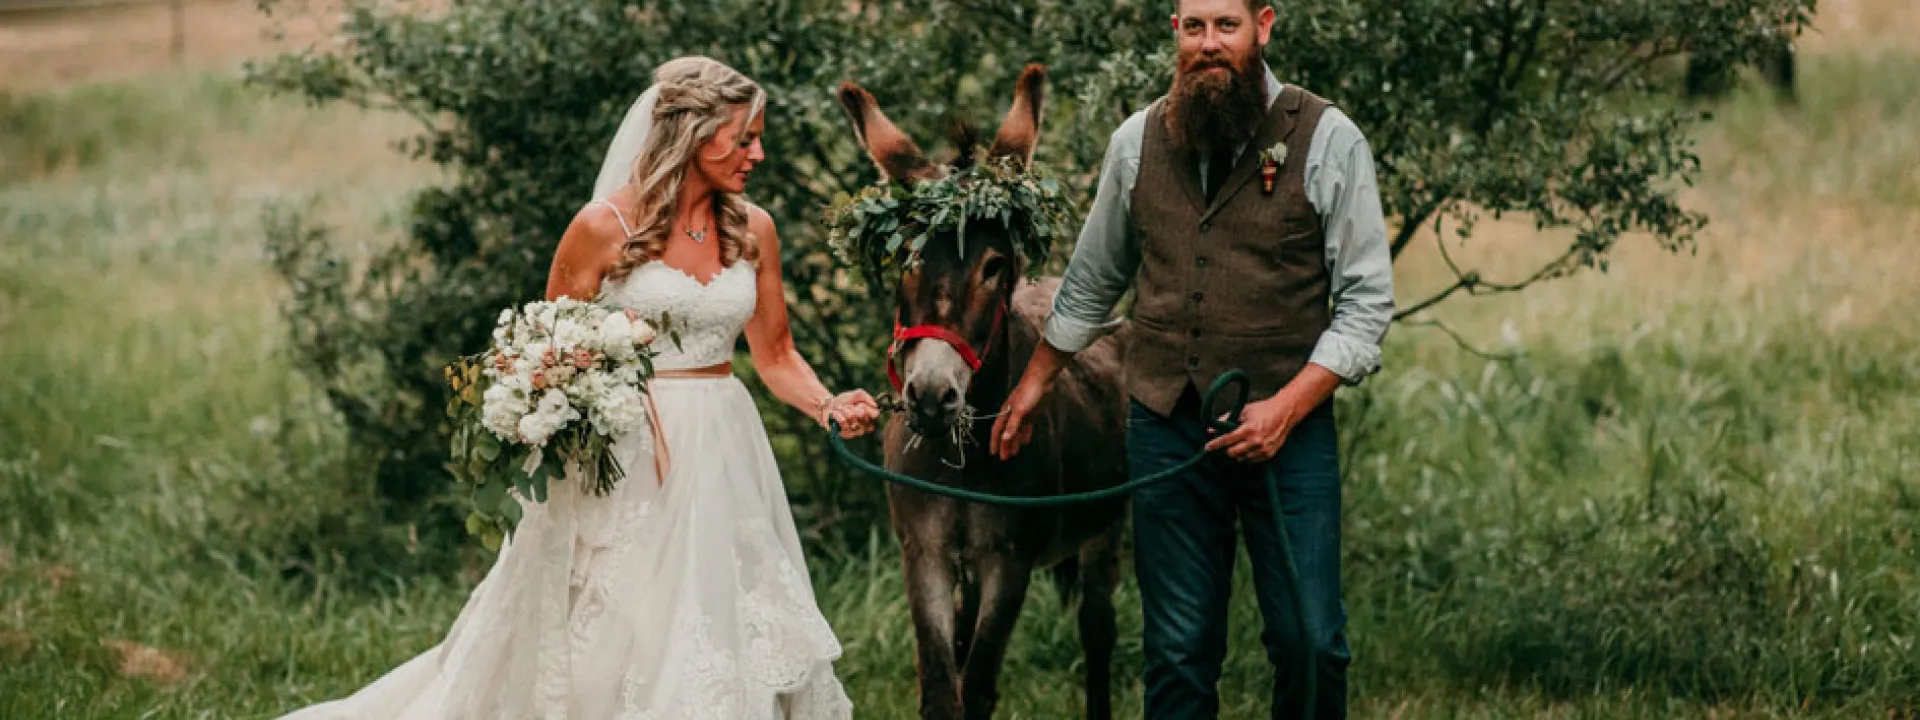 Bride and groom with a donkey bedecked in a floral wreath